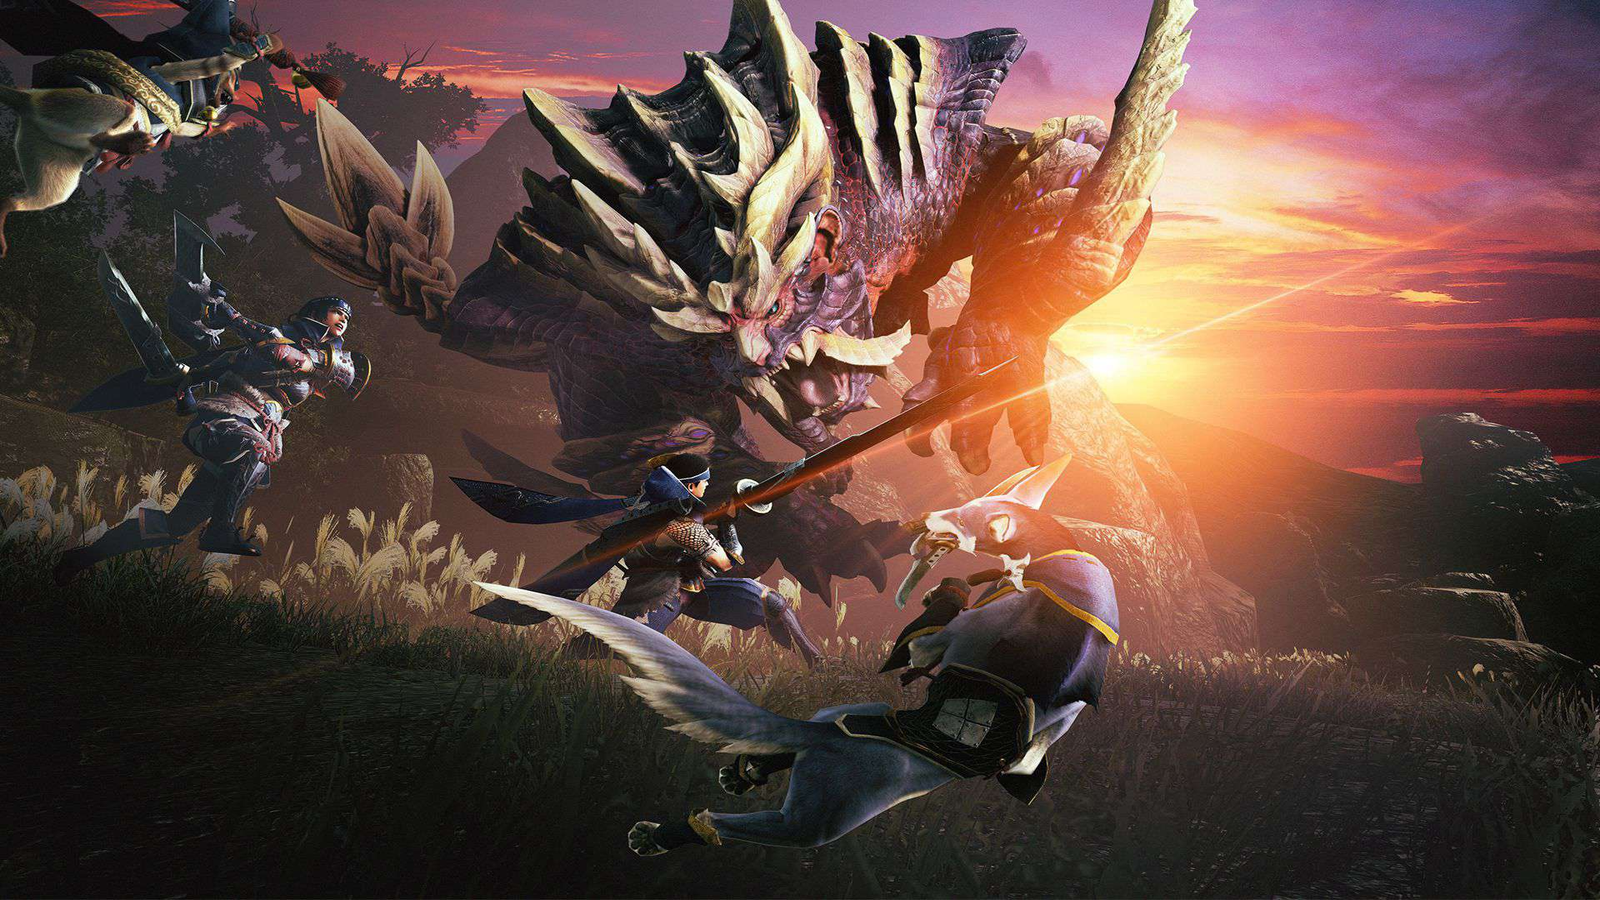 Monster Hunter Rise (PC) review: every bit as great as Monster Hunter World